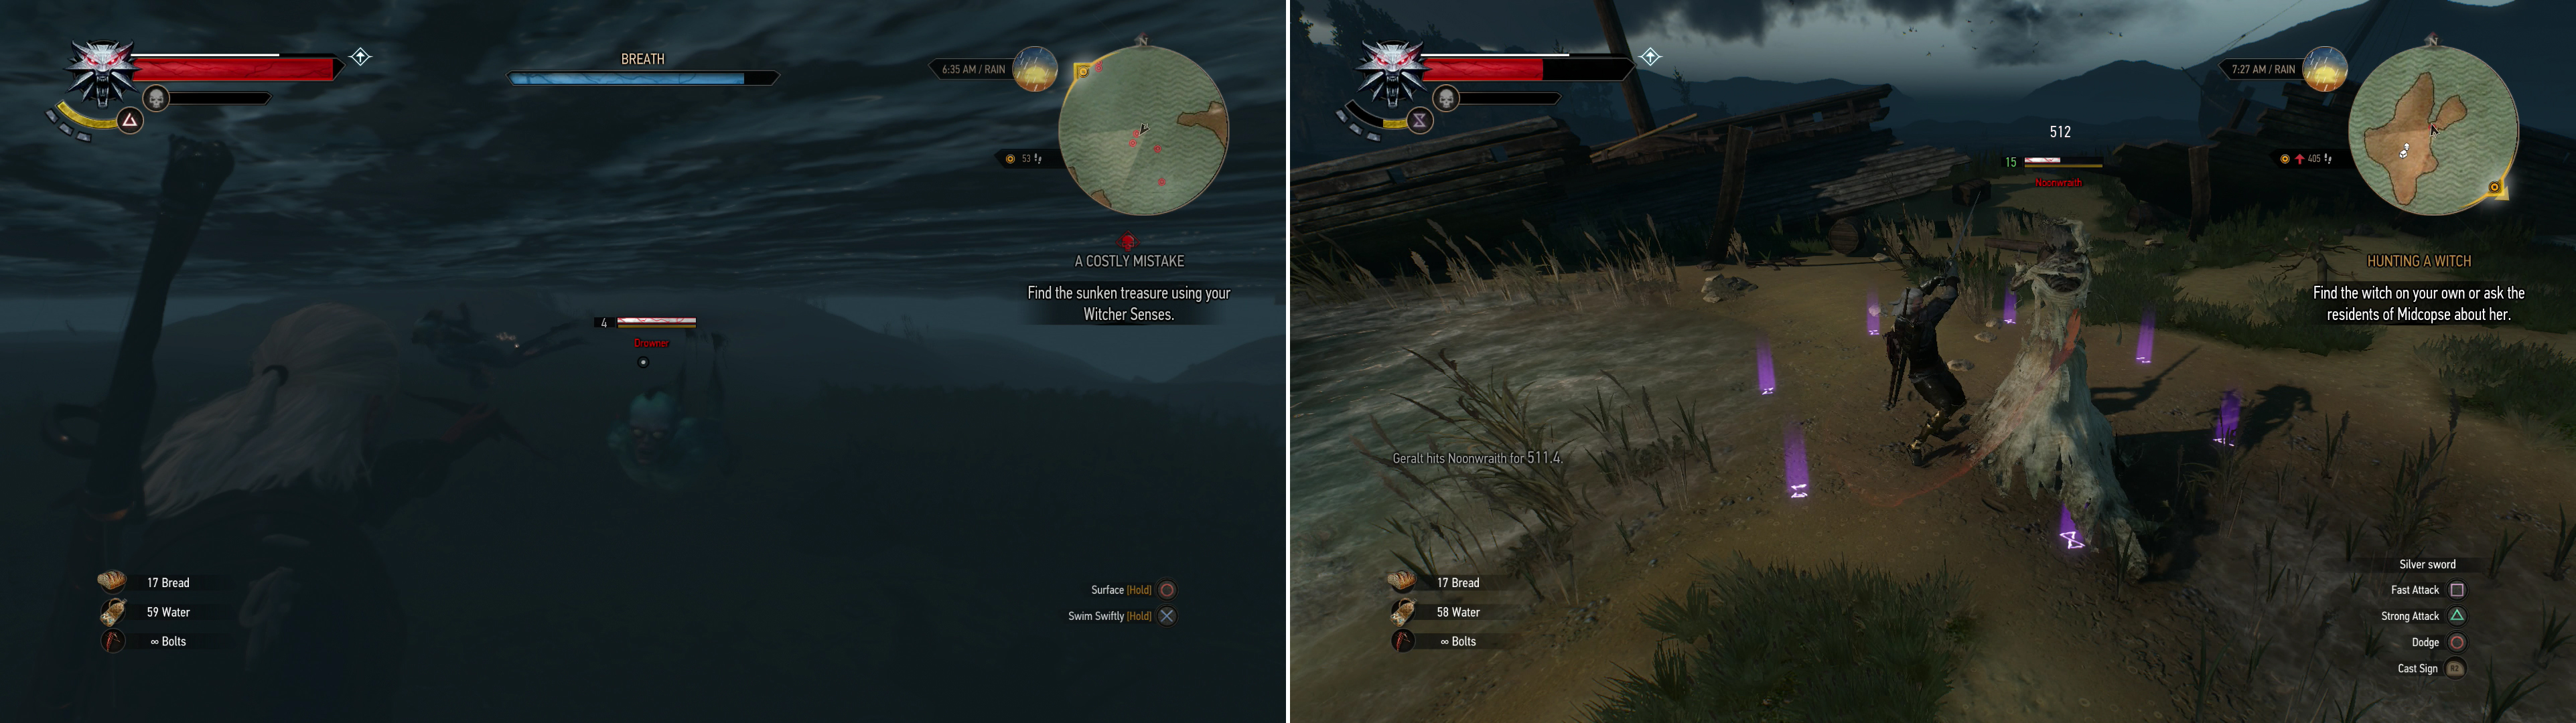 Plenty of Drowners dwell in the waters off western Velen (left), but even more dangerous foes can be found on nearby islands (right).